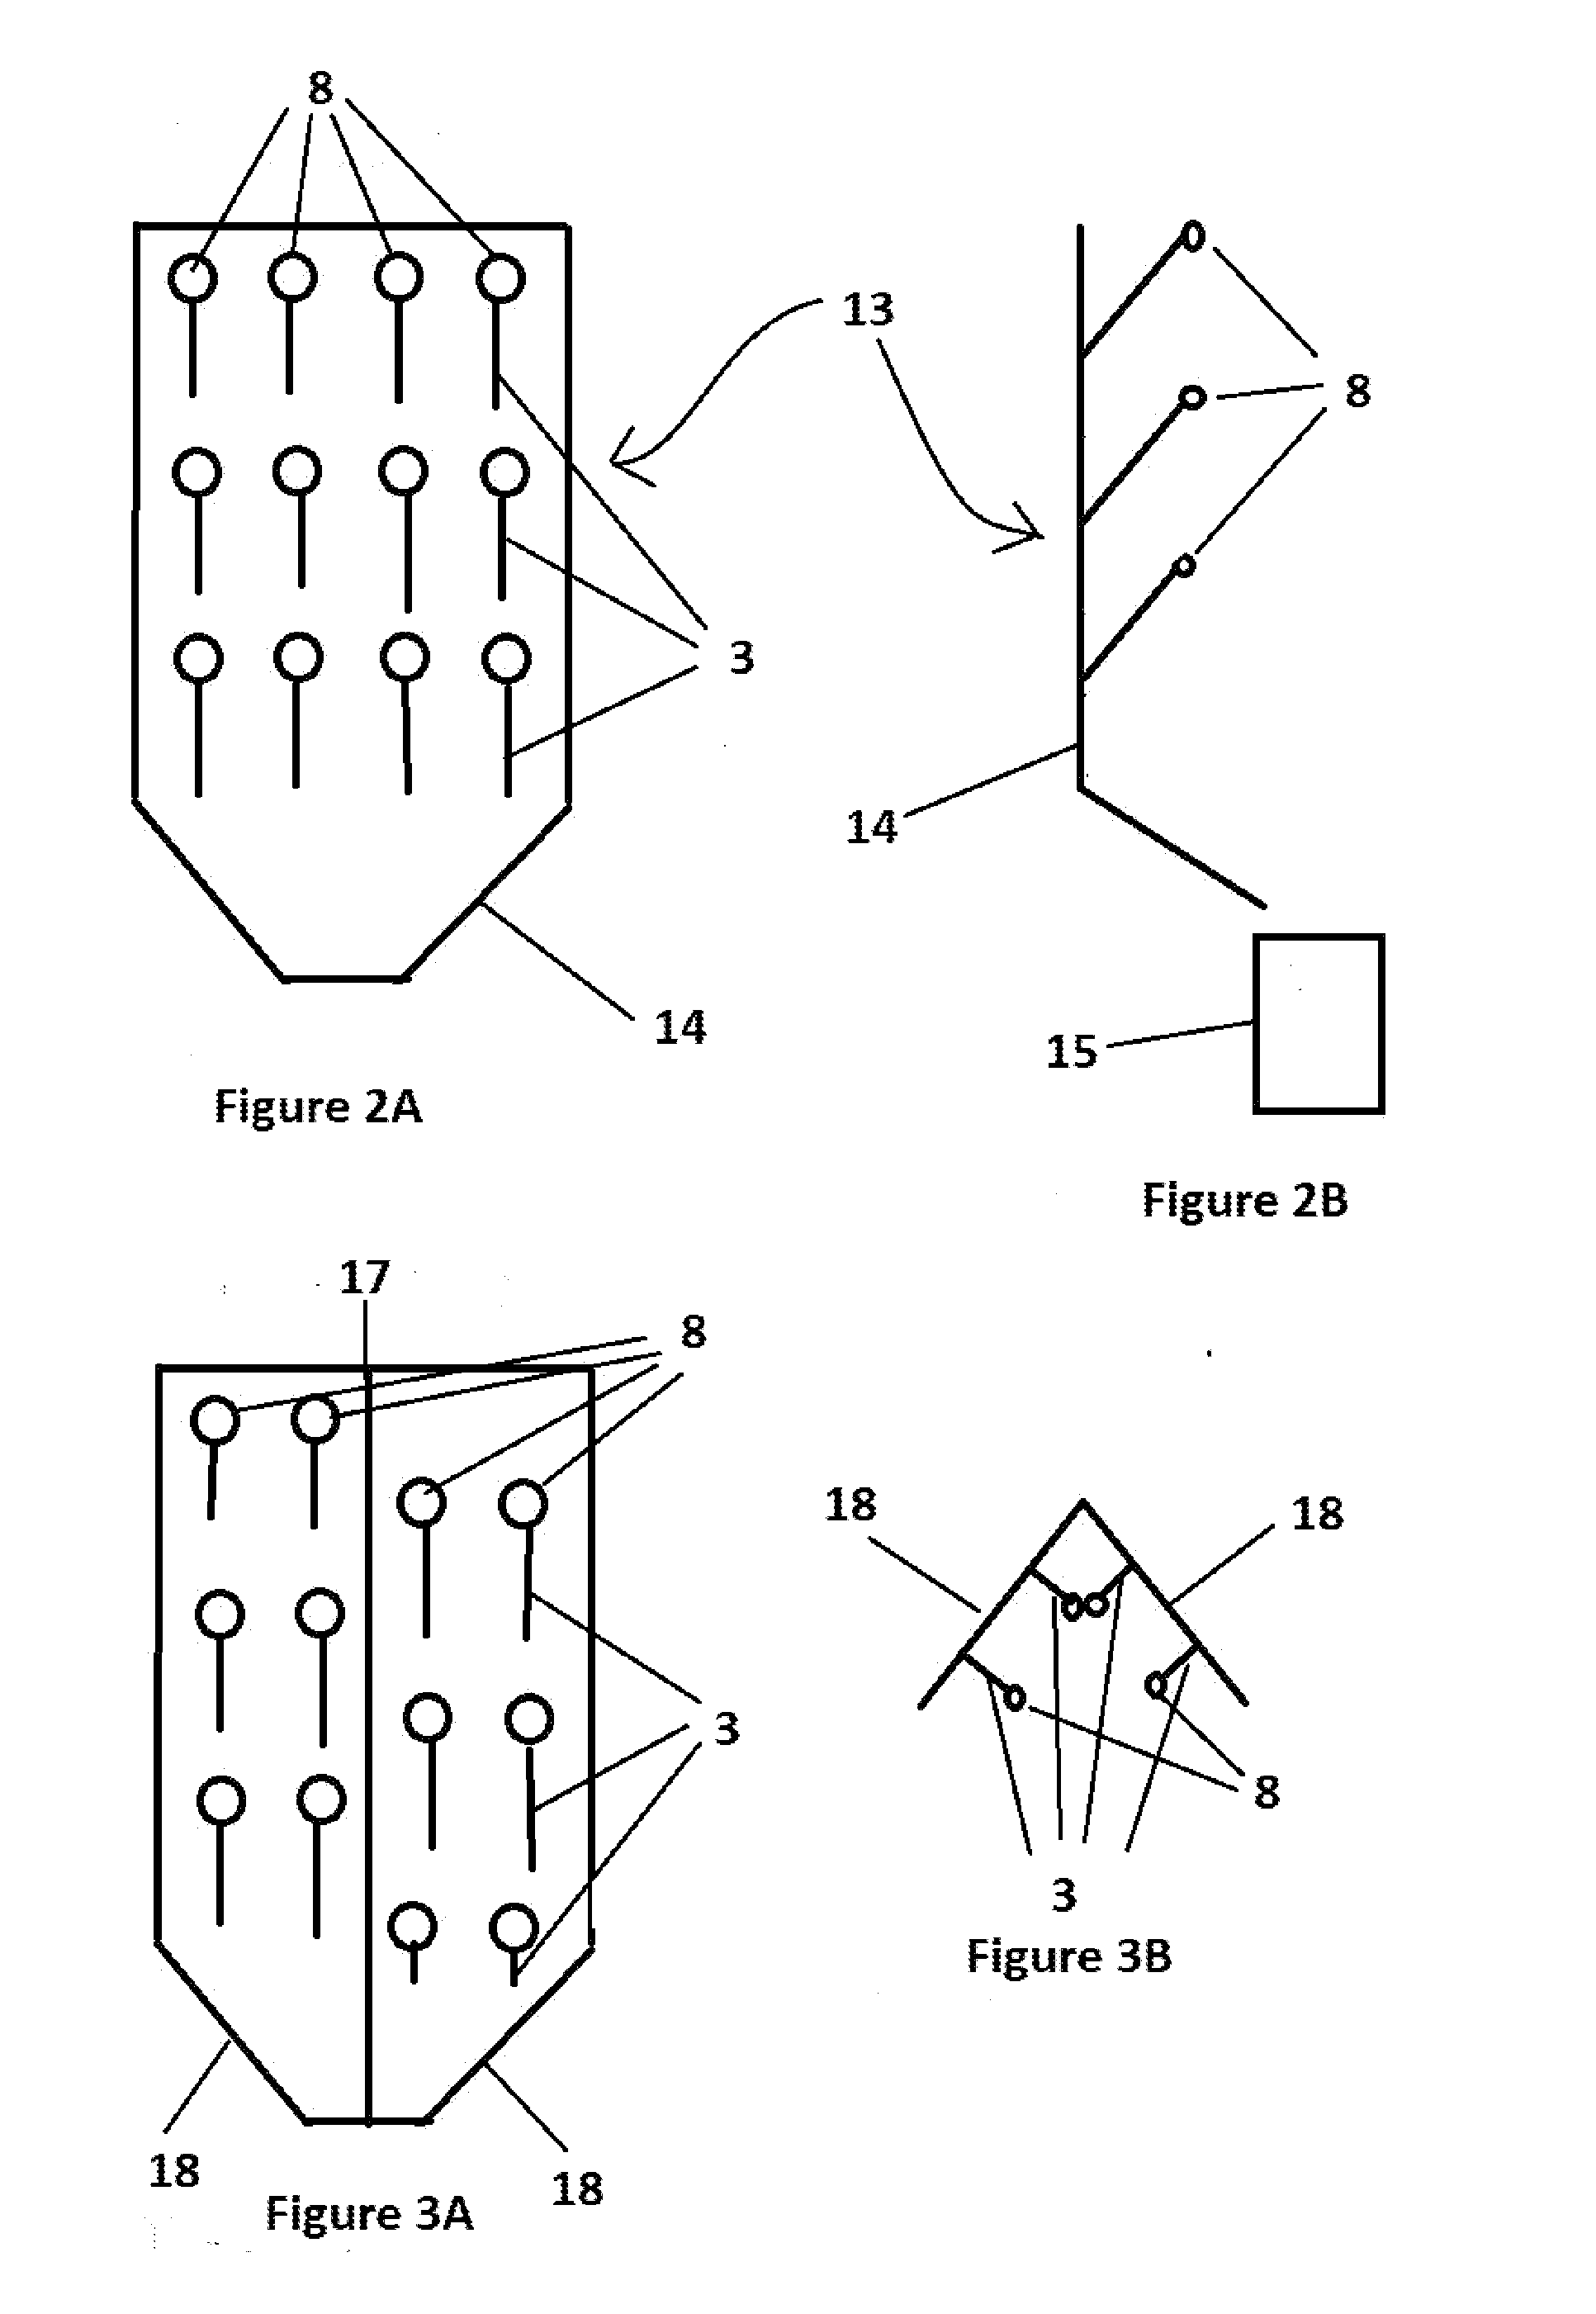 Funnel Support and Storage Systems